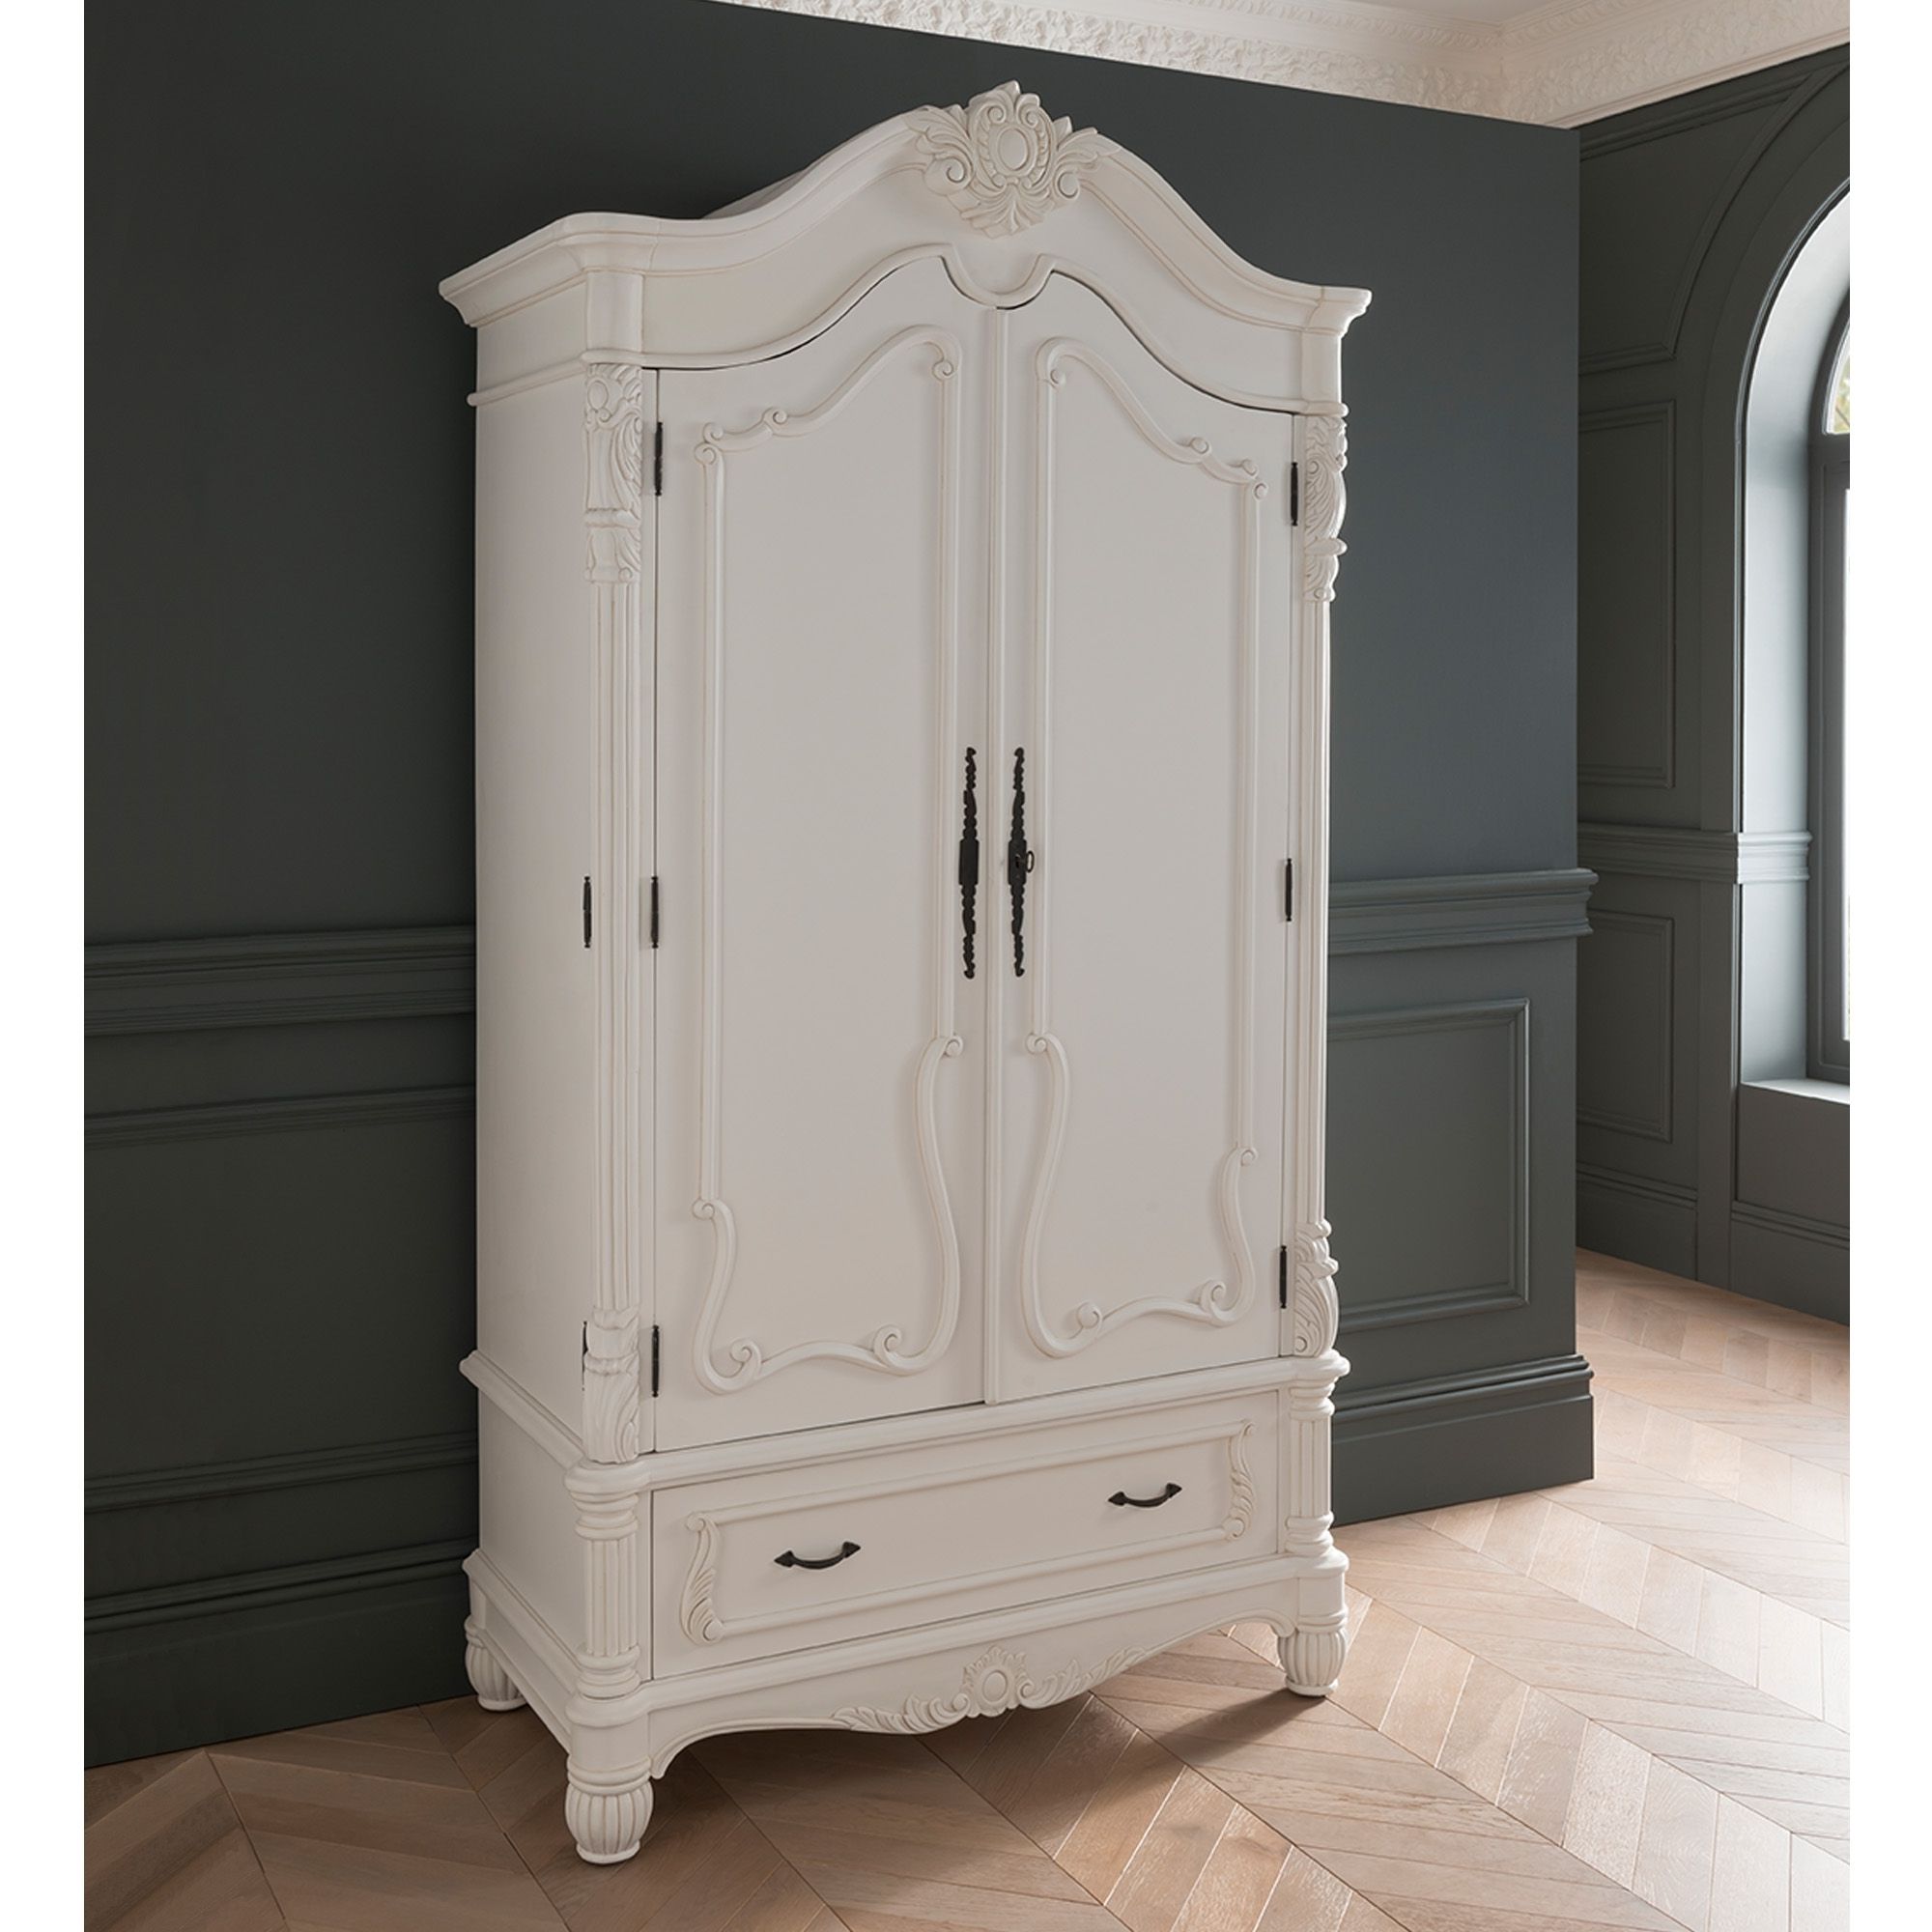 Antique French Style White Finished 1 Drawer Wardrobe | Homesdirect365 Throughout Antique French Wardrobes (Gallery 12 of 20)